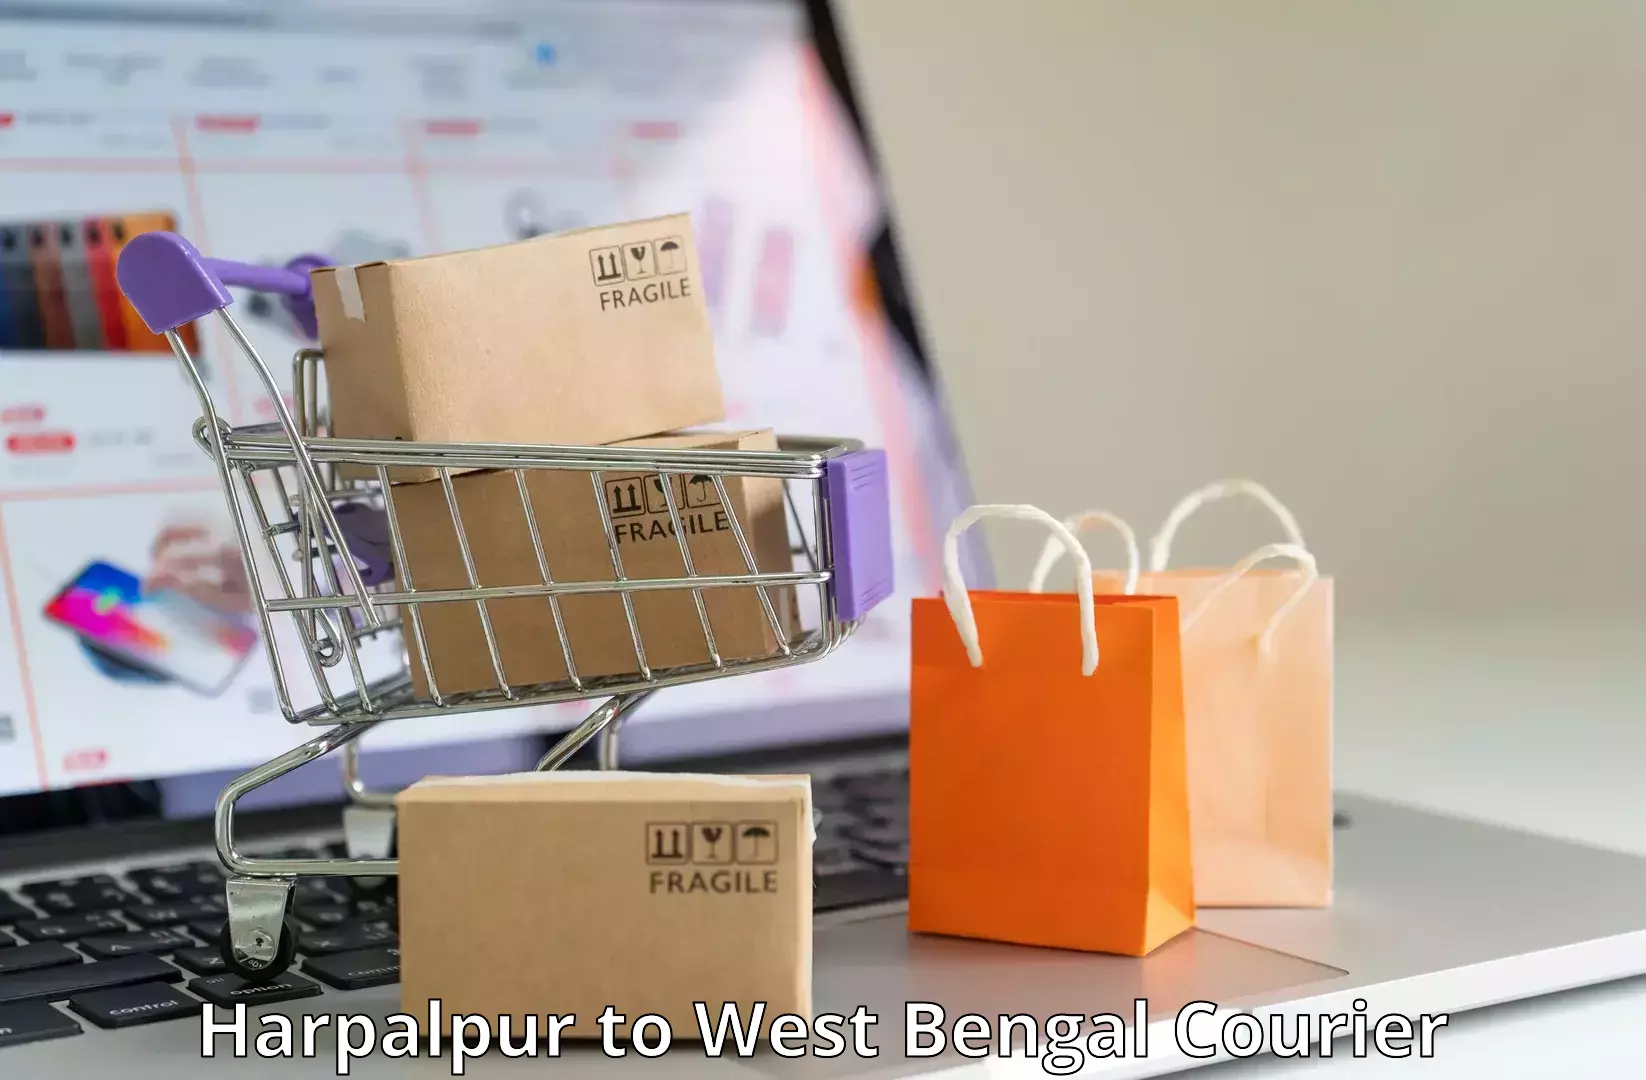 Advanced package delivery Harpalpur to Kolkata Port